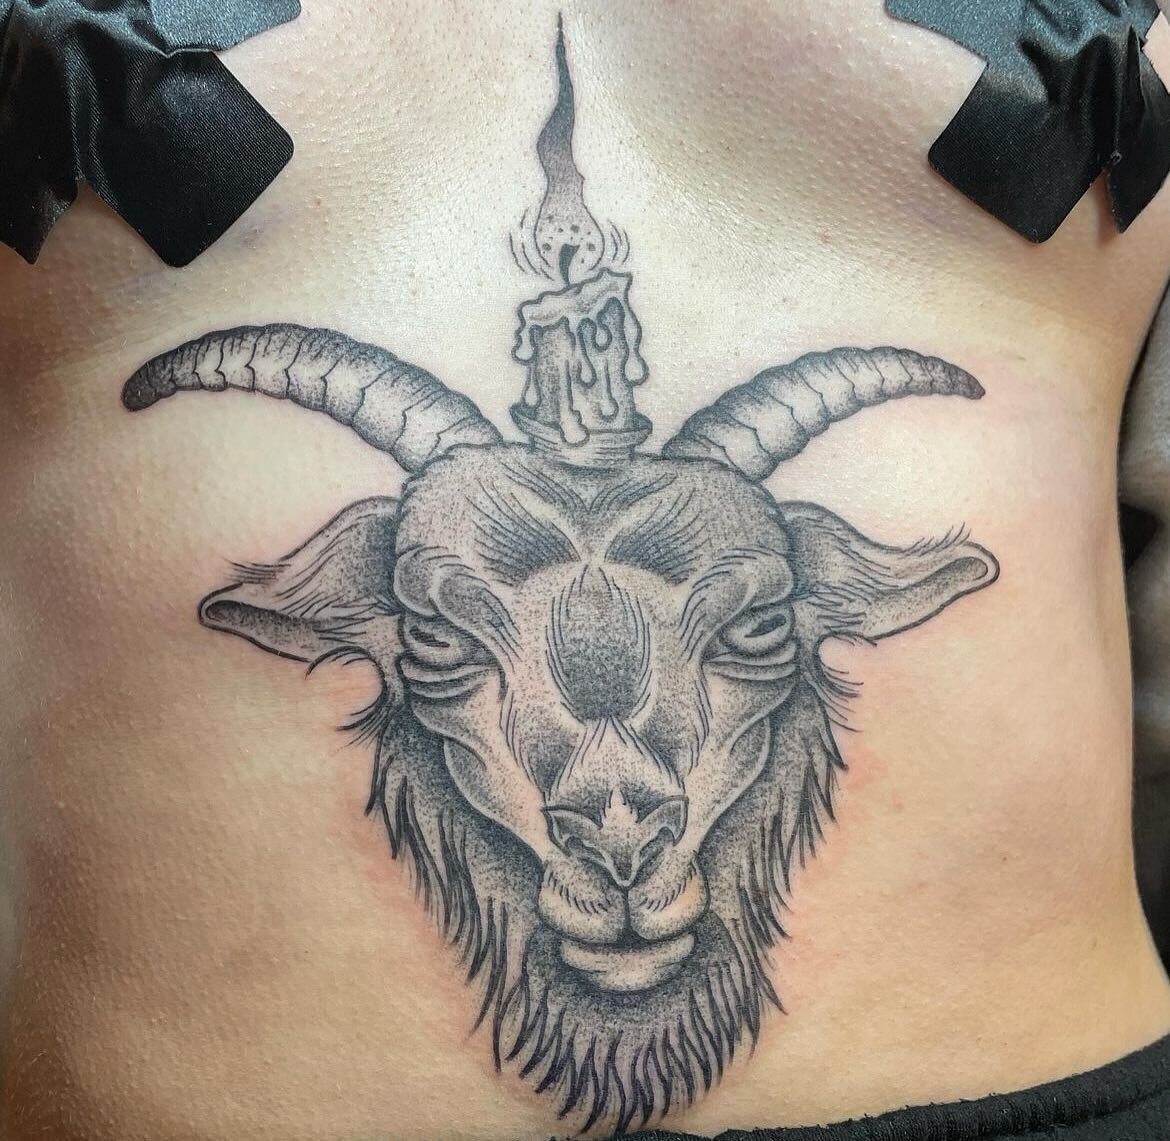 Baphomet head made by the super talented @jakeacreetattoos 😈